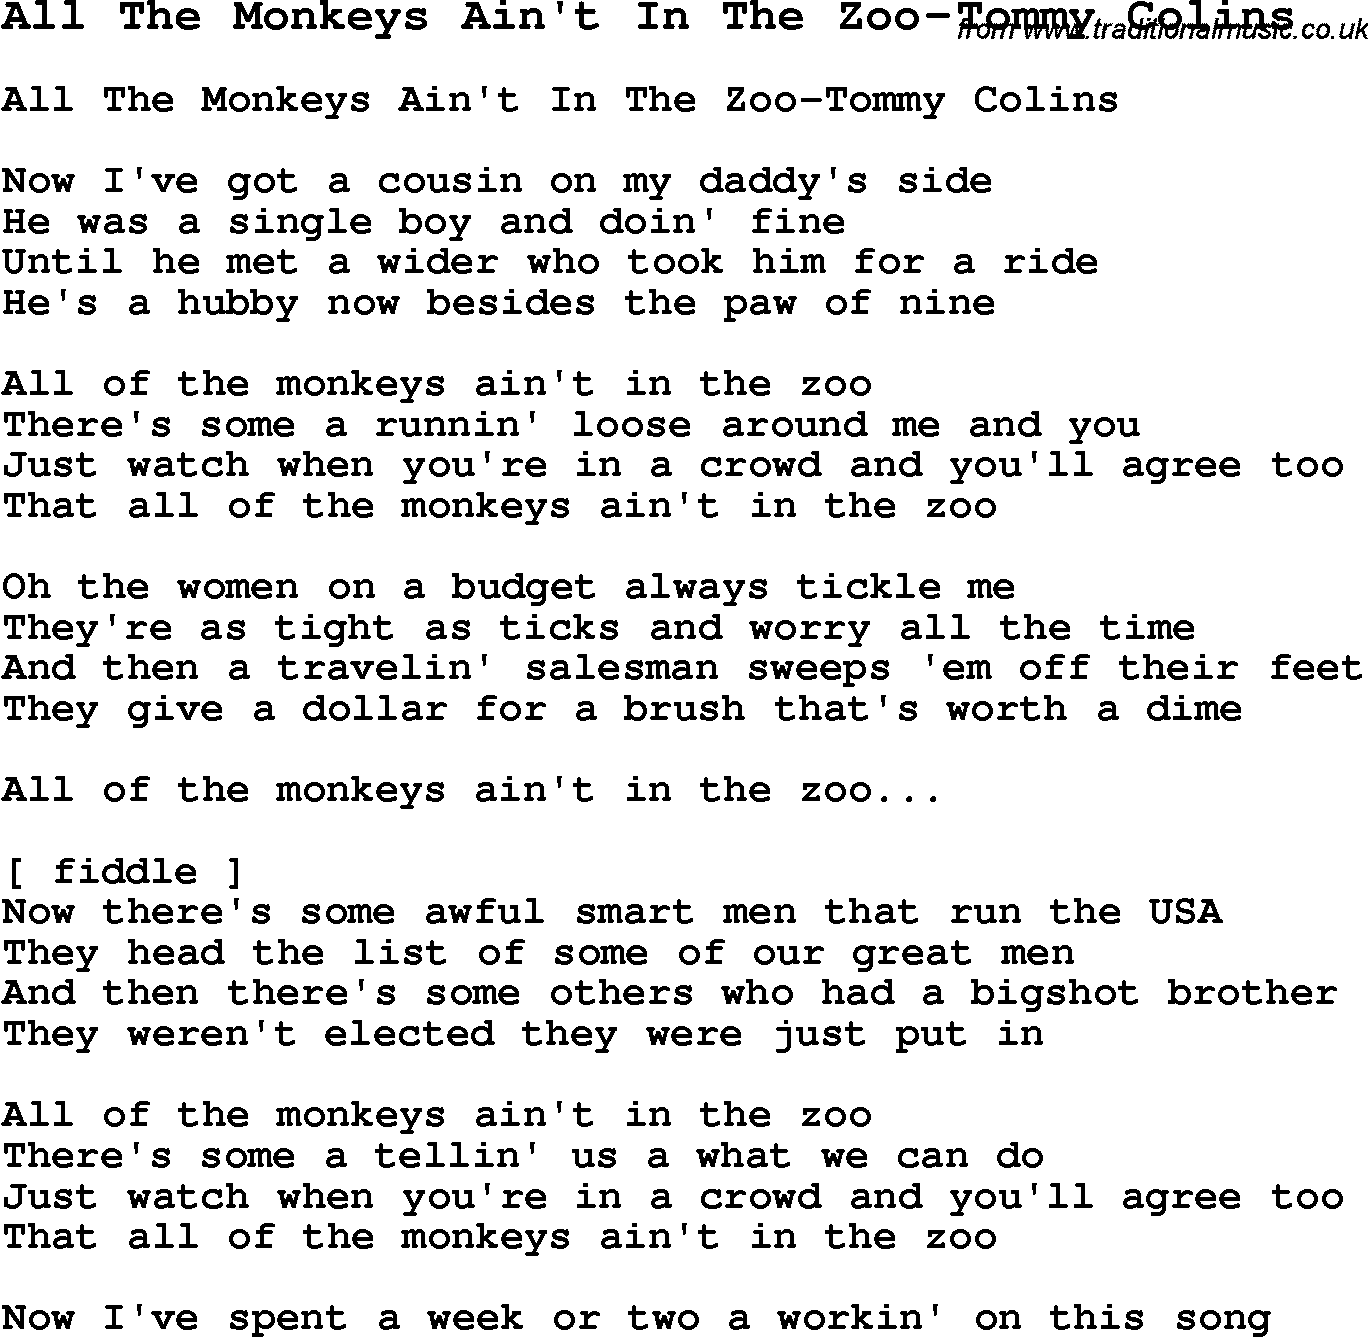 Skiffle Song Lyrics for All The Monkeys Ain't In The Zoo-Tommy Colins.